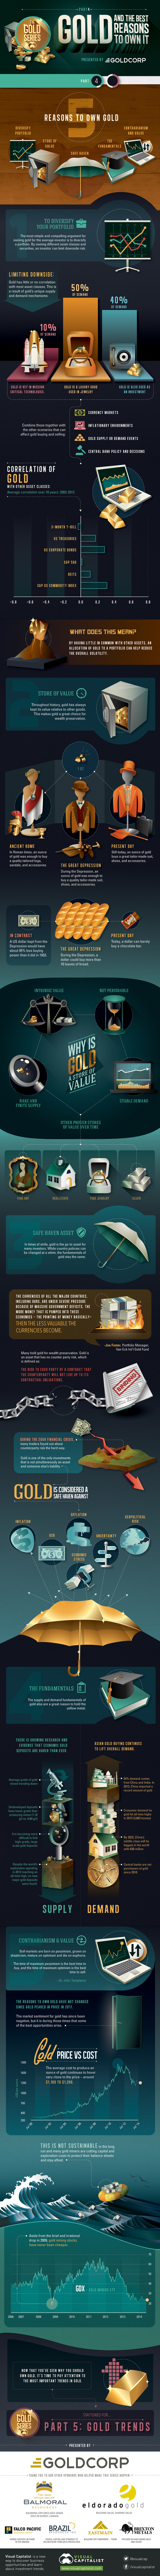 4-gold-series-infographic